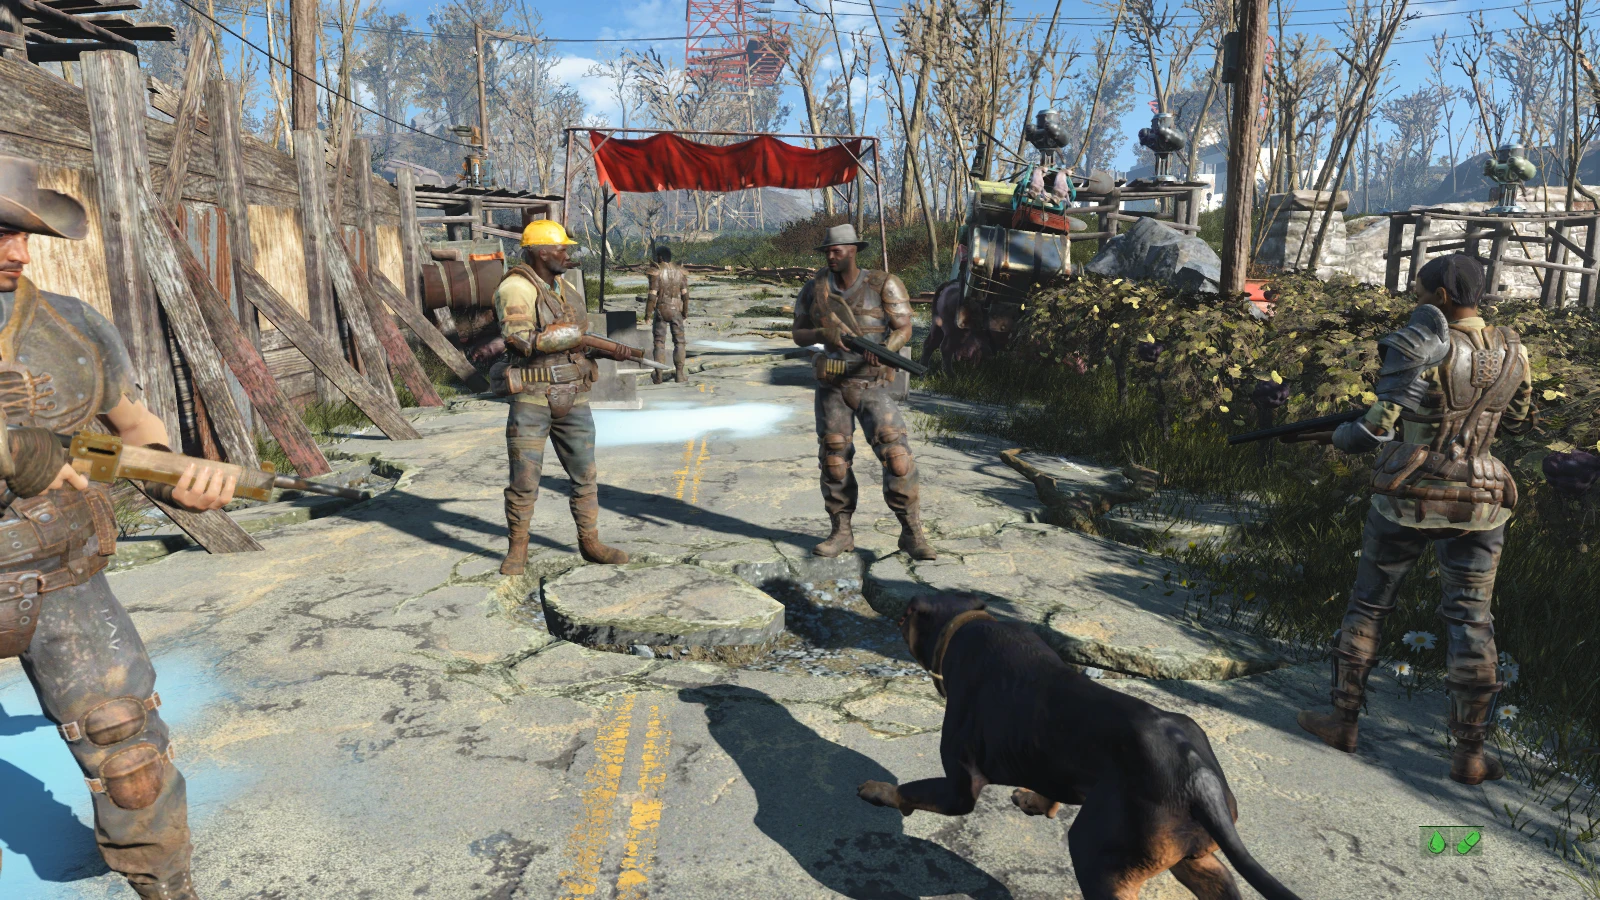 Immersive gameplay. Fallout 4 Gameplay. Fallout 4 ps4 Gameplay. Fallout Gameplay. Fallout 4 игровой процесс.